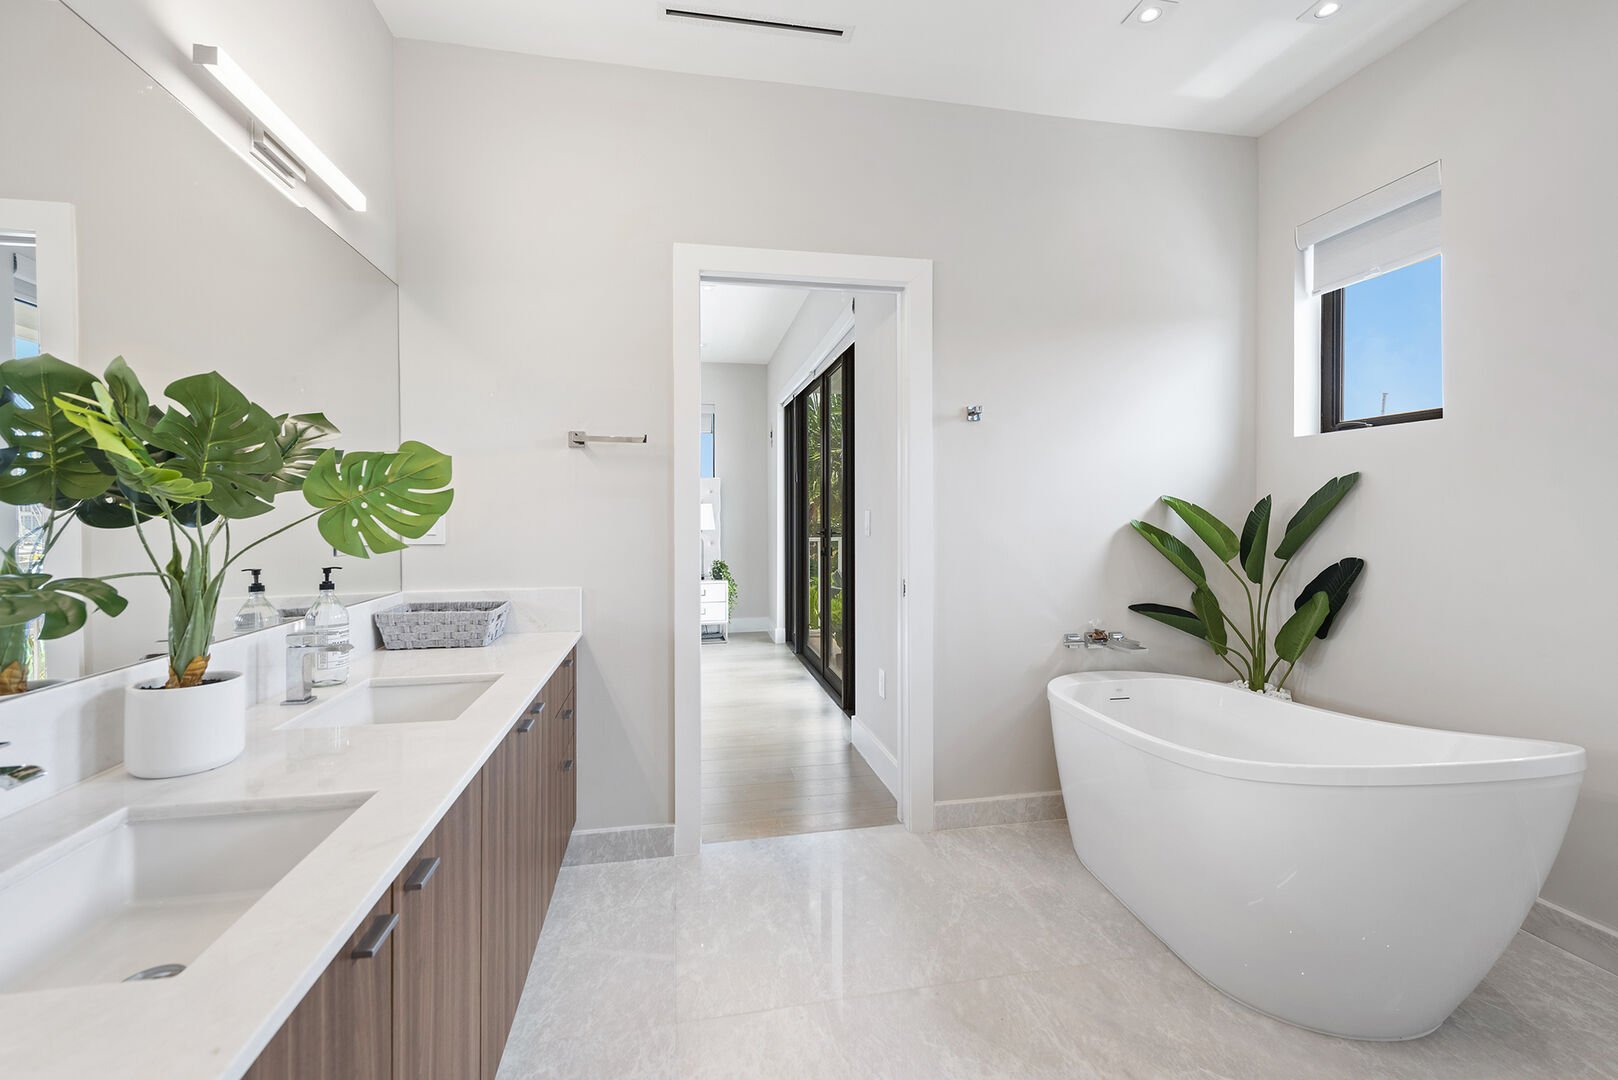 The primary bathroom features a walk-in shower, double sinks and a bathtub. Fiji amenities and Comphy opulent towels.